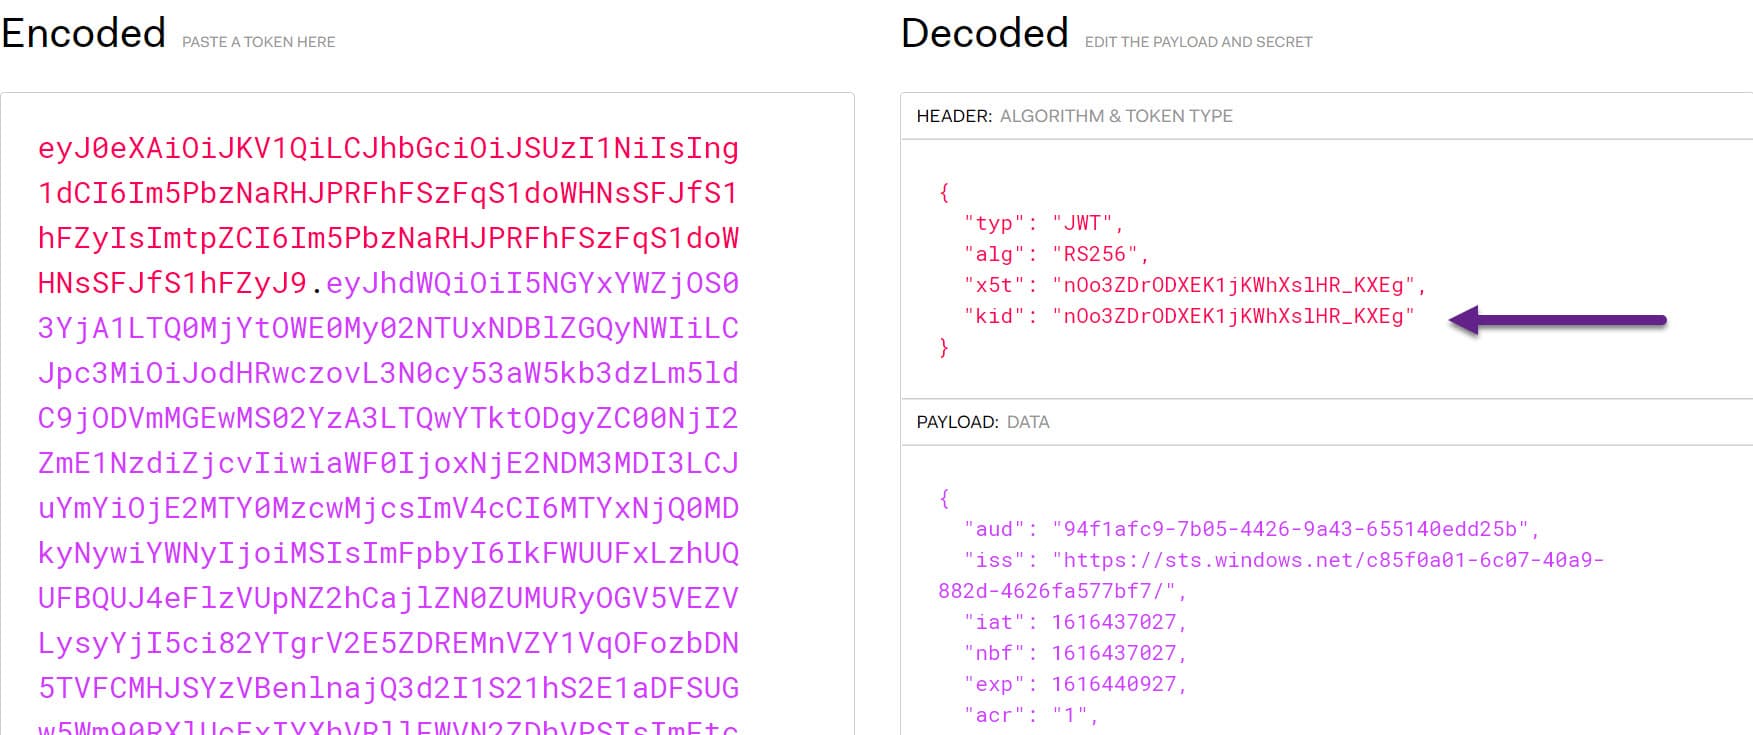 Bearer Token inspected in jwt.io with the kid property highlighted, that is used to match up with the key from jwks_uri.